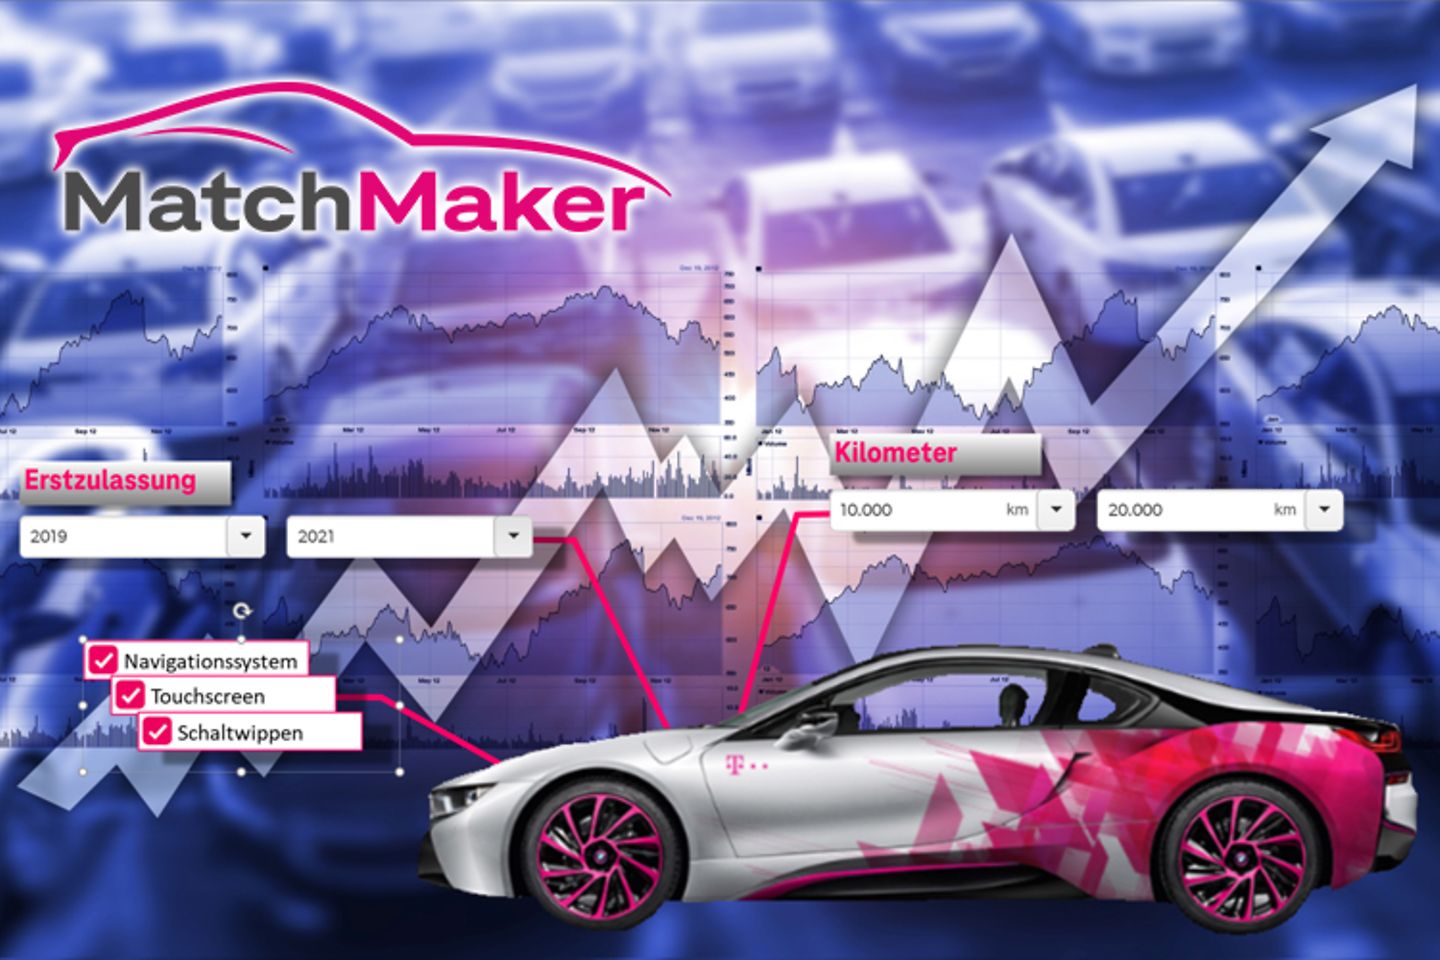 Logo of the Matchmaker by T-Systems